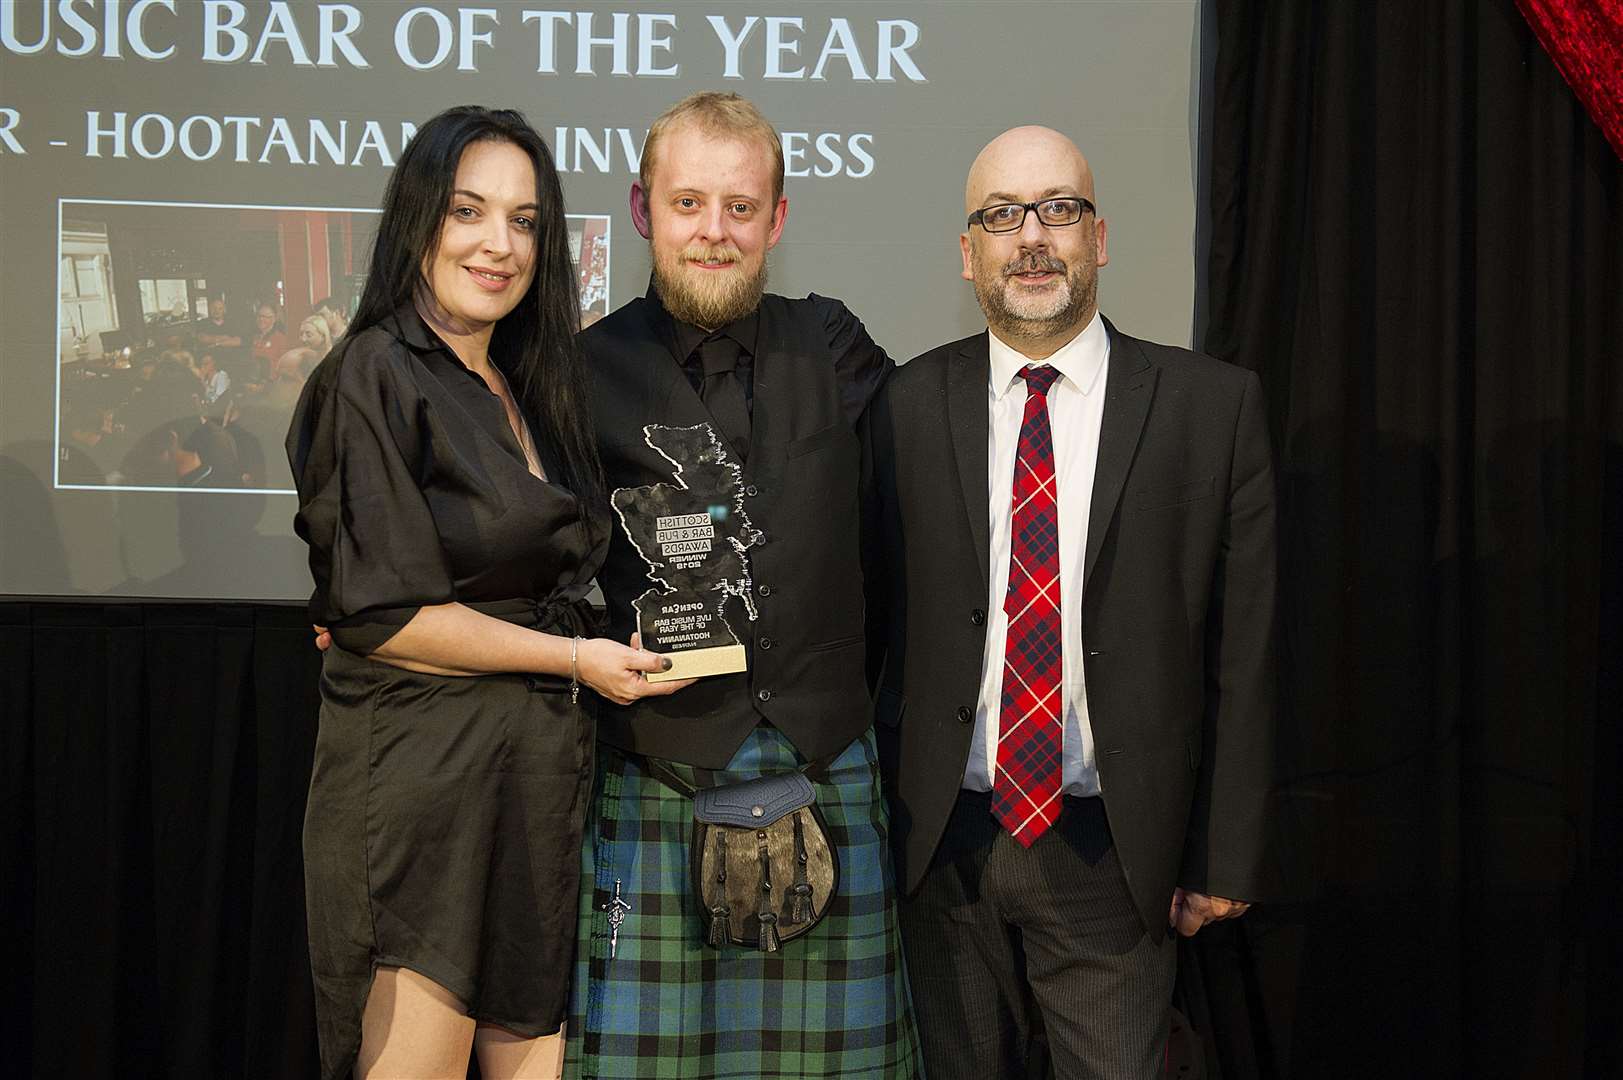 Brian D’Souza, of Open Ear (right), presents the award to Alister Mckay and Emma Wemyss.